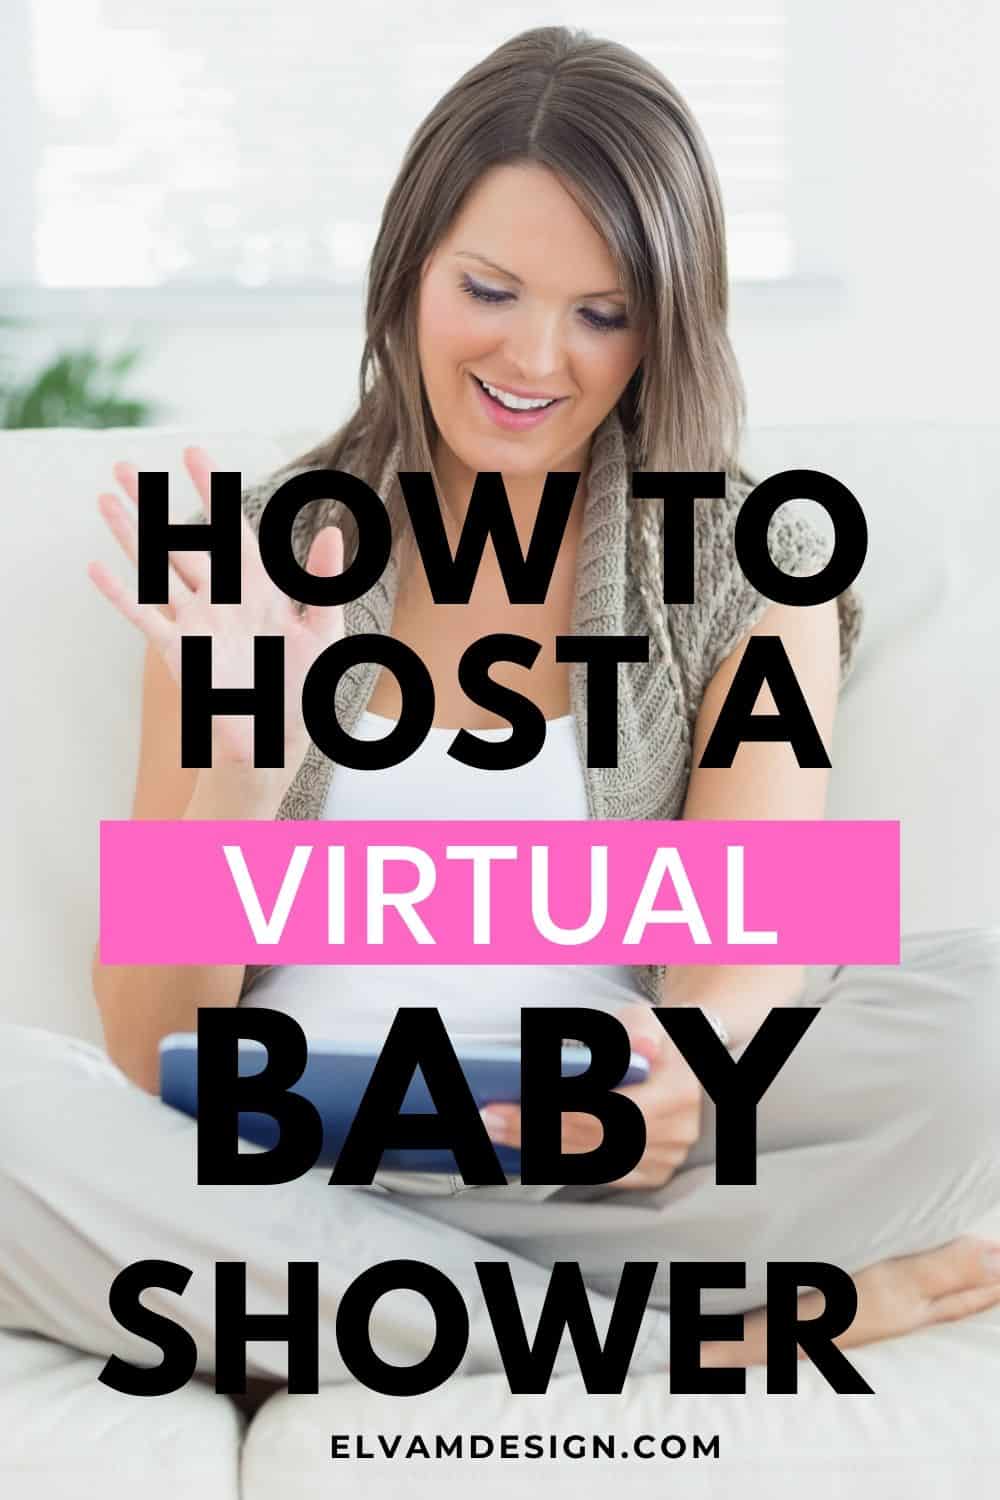 How to host a virtual baby shower